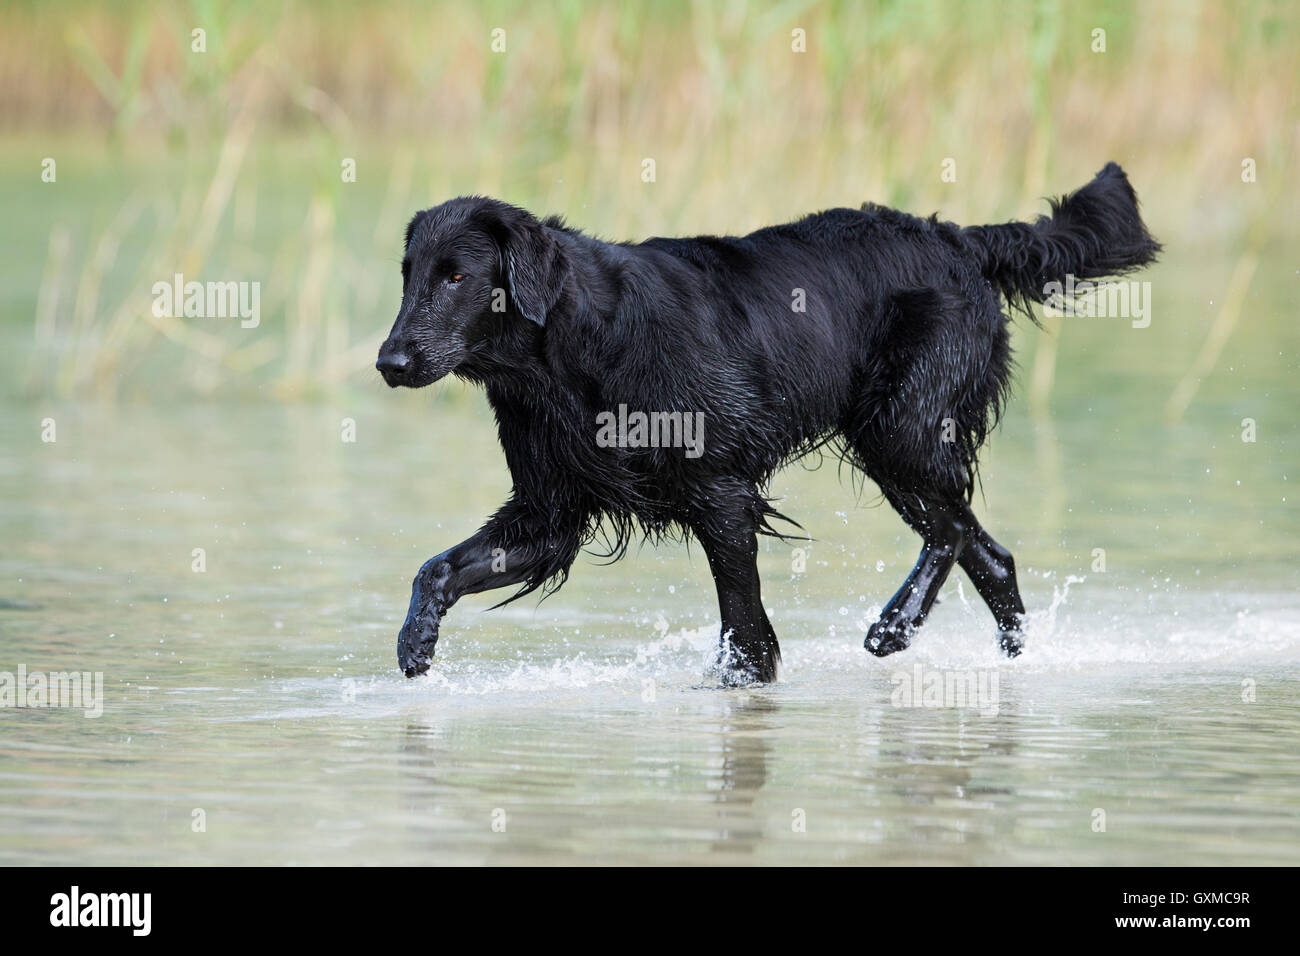 Flat-Coated Retriever, black, running through water in front of reeds, Tyrol, Austria Stock Photo